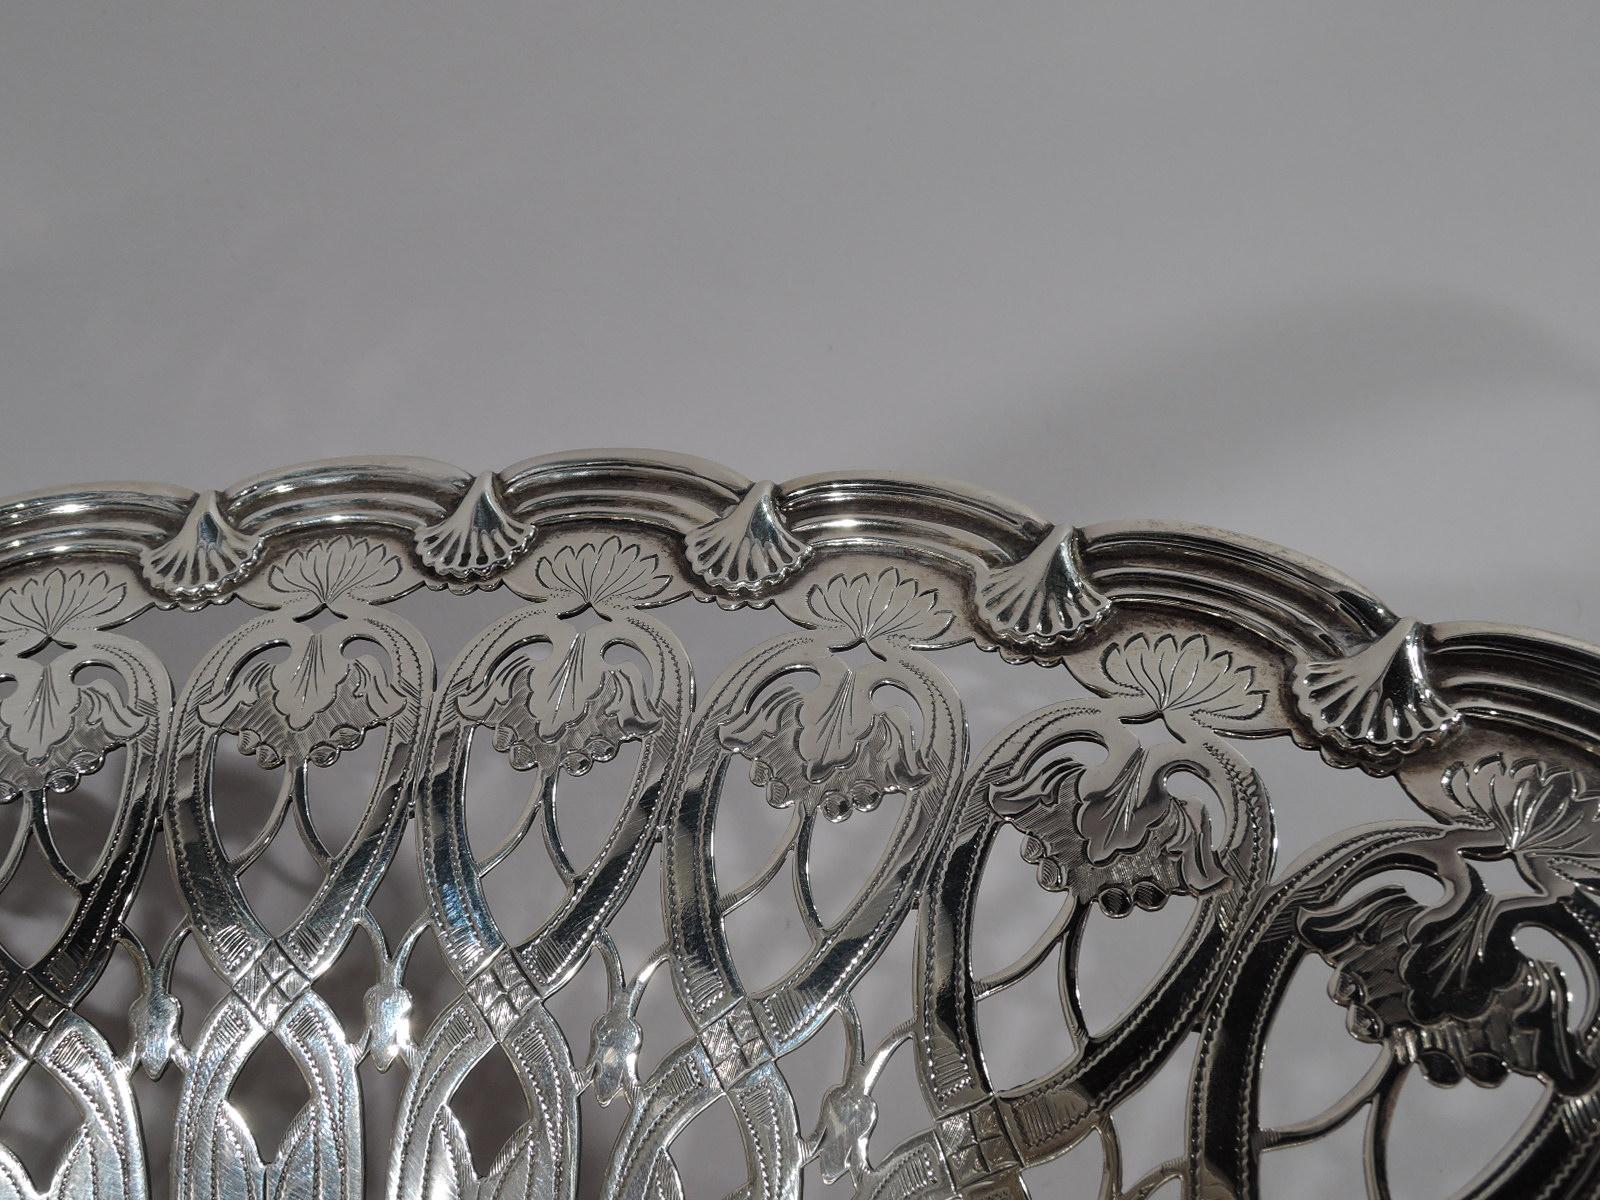 Large Tiffany Edwardian Art Nouveau Sterling Silver Basket In Excellent Condition For Sale In New York, NY